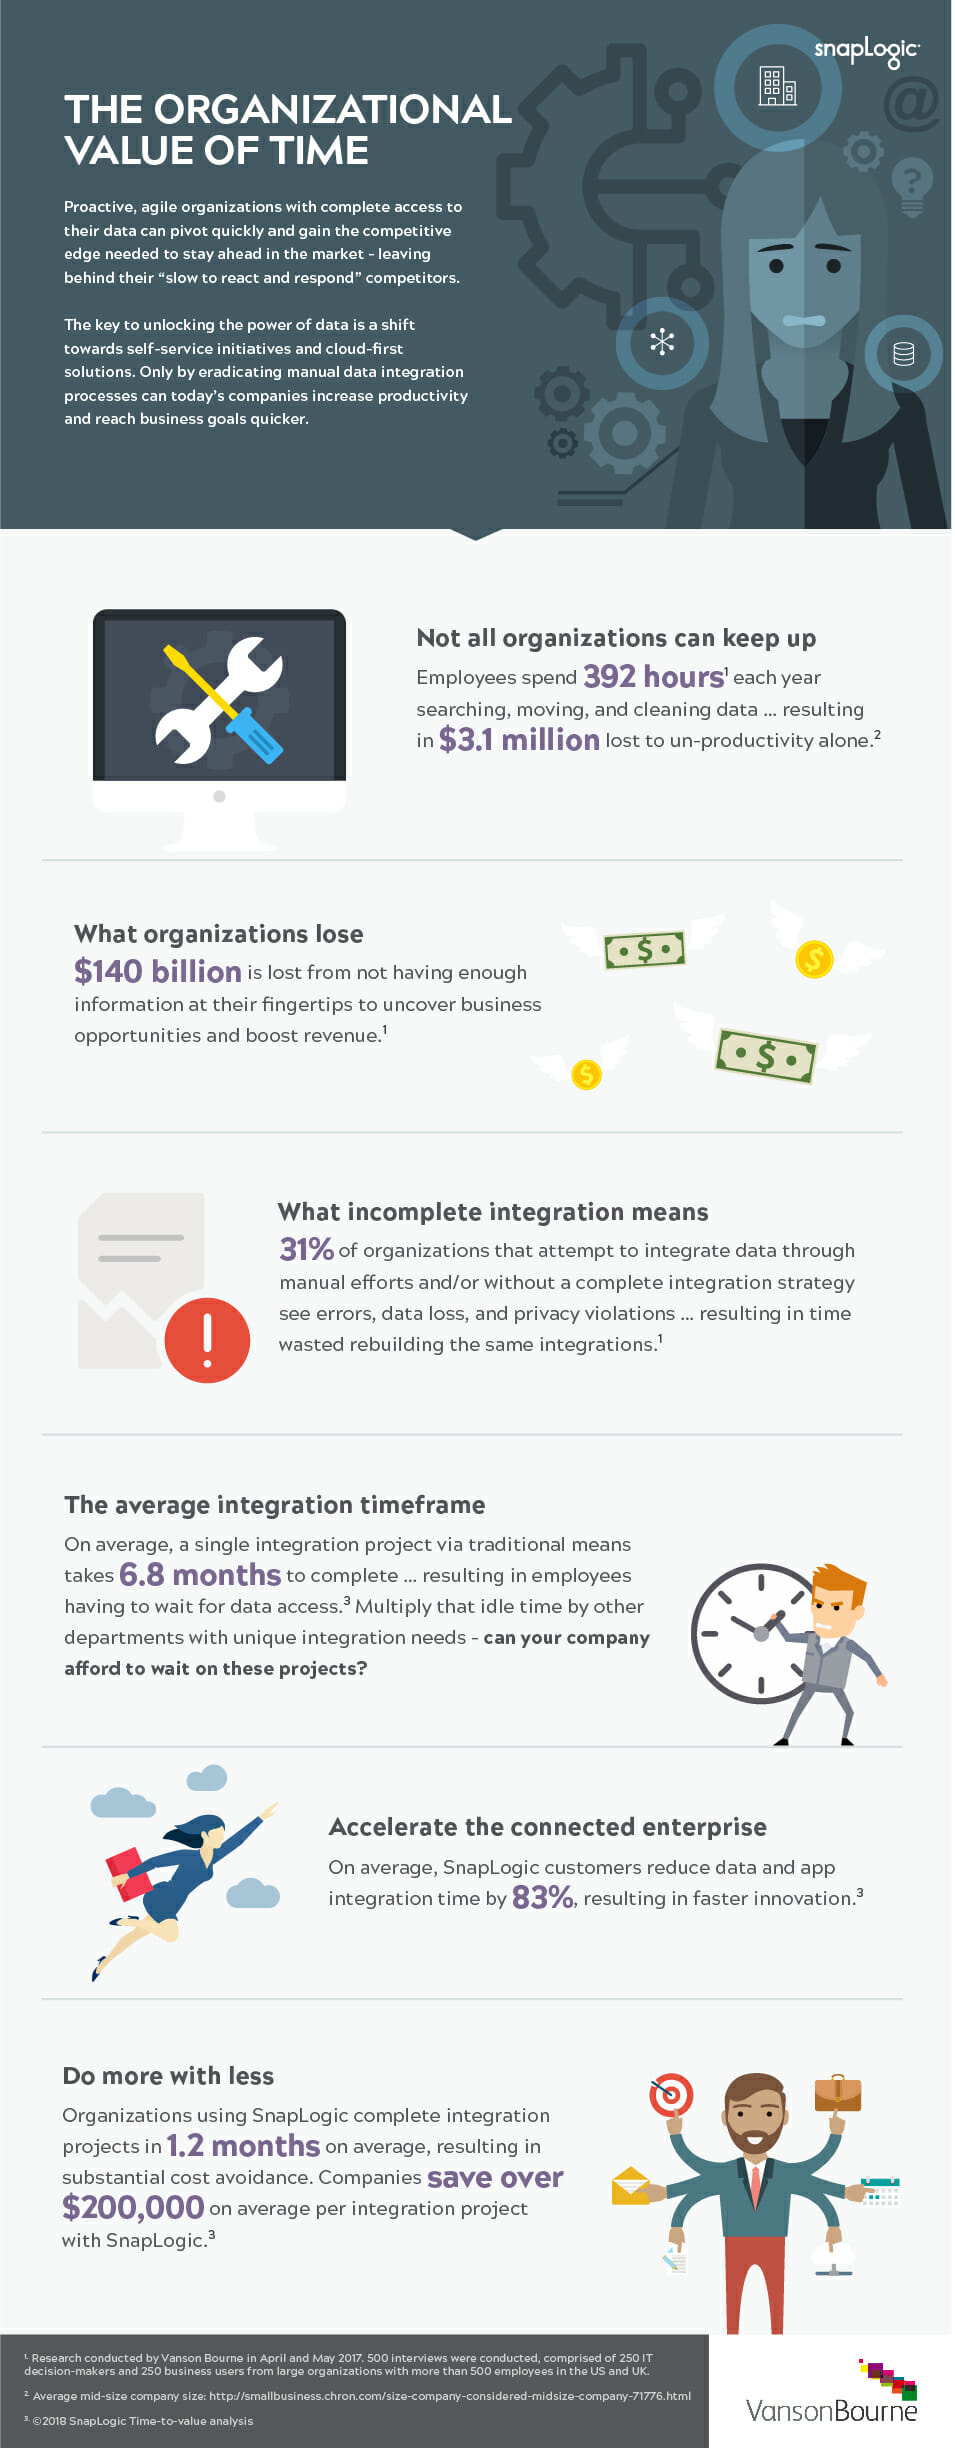 Agile organizations that use SnapLogic save substantial time and money and become more productive overall. 